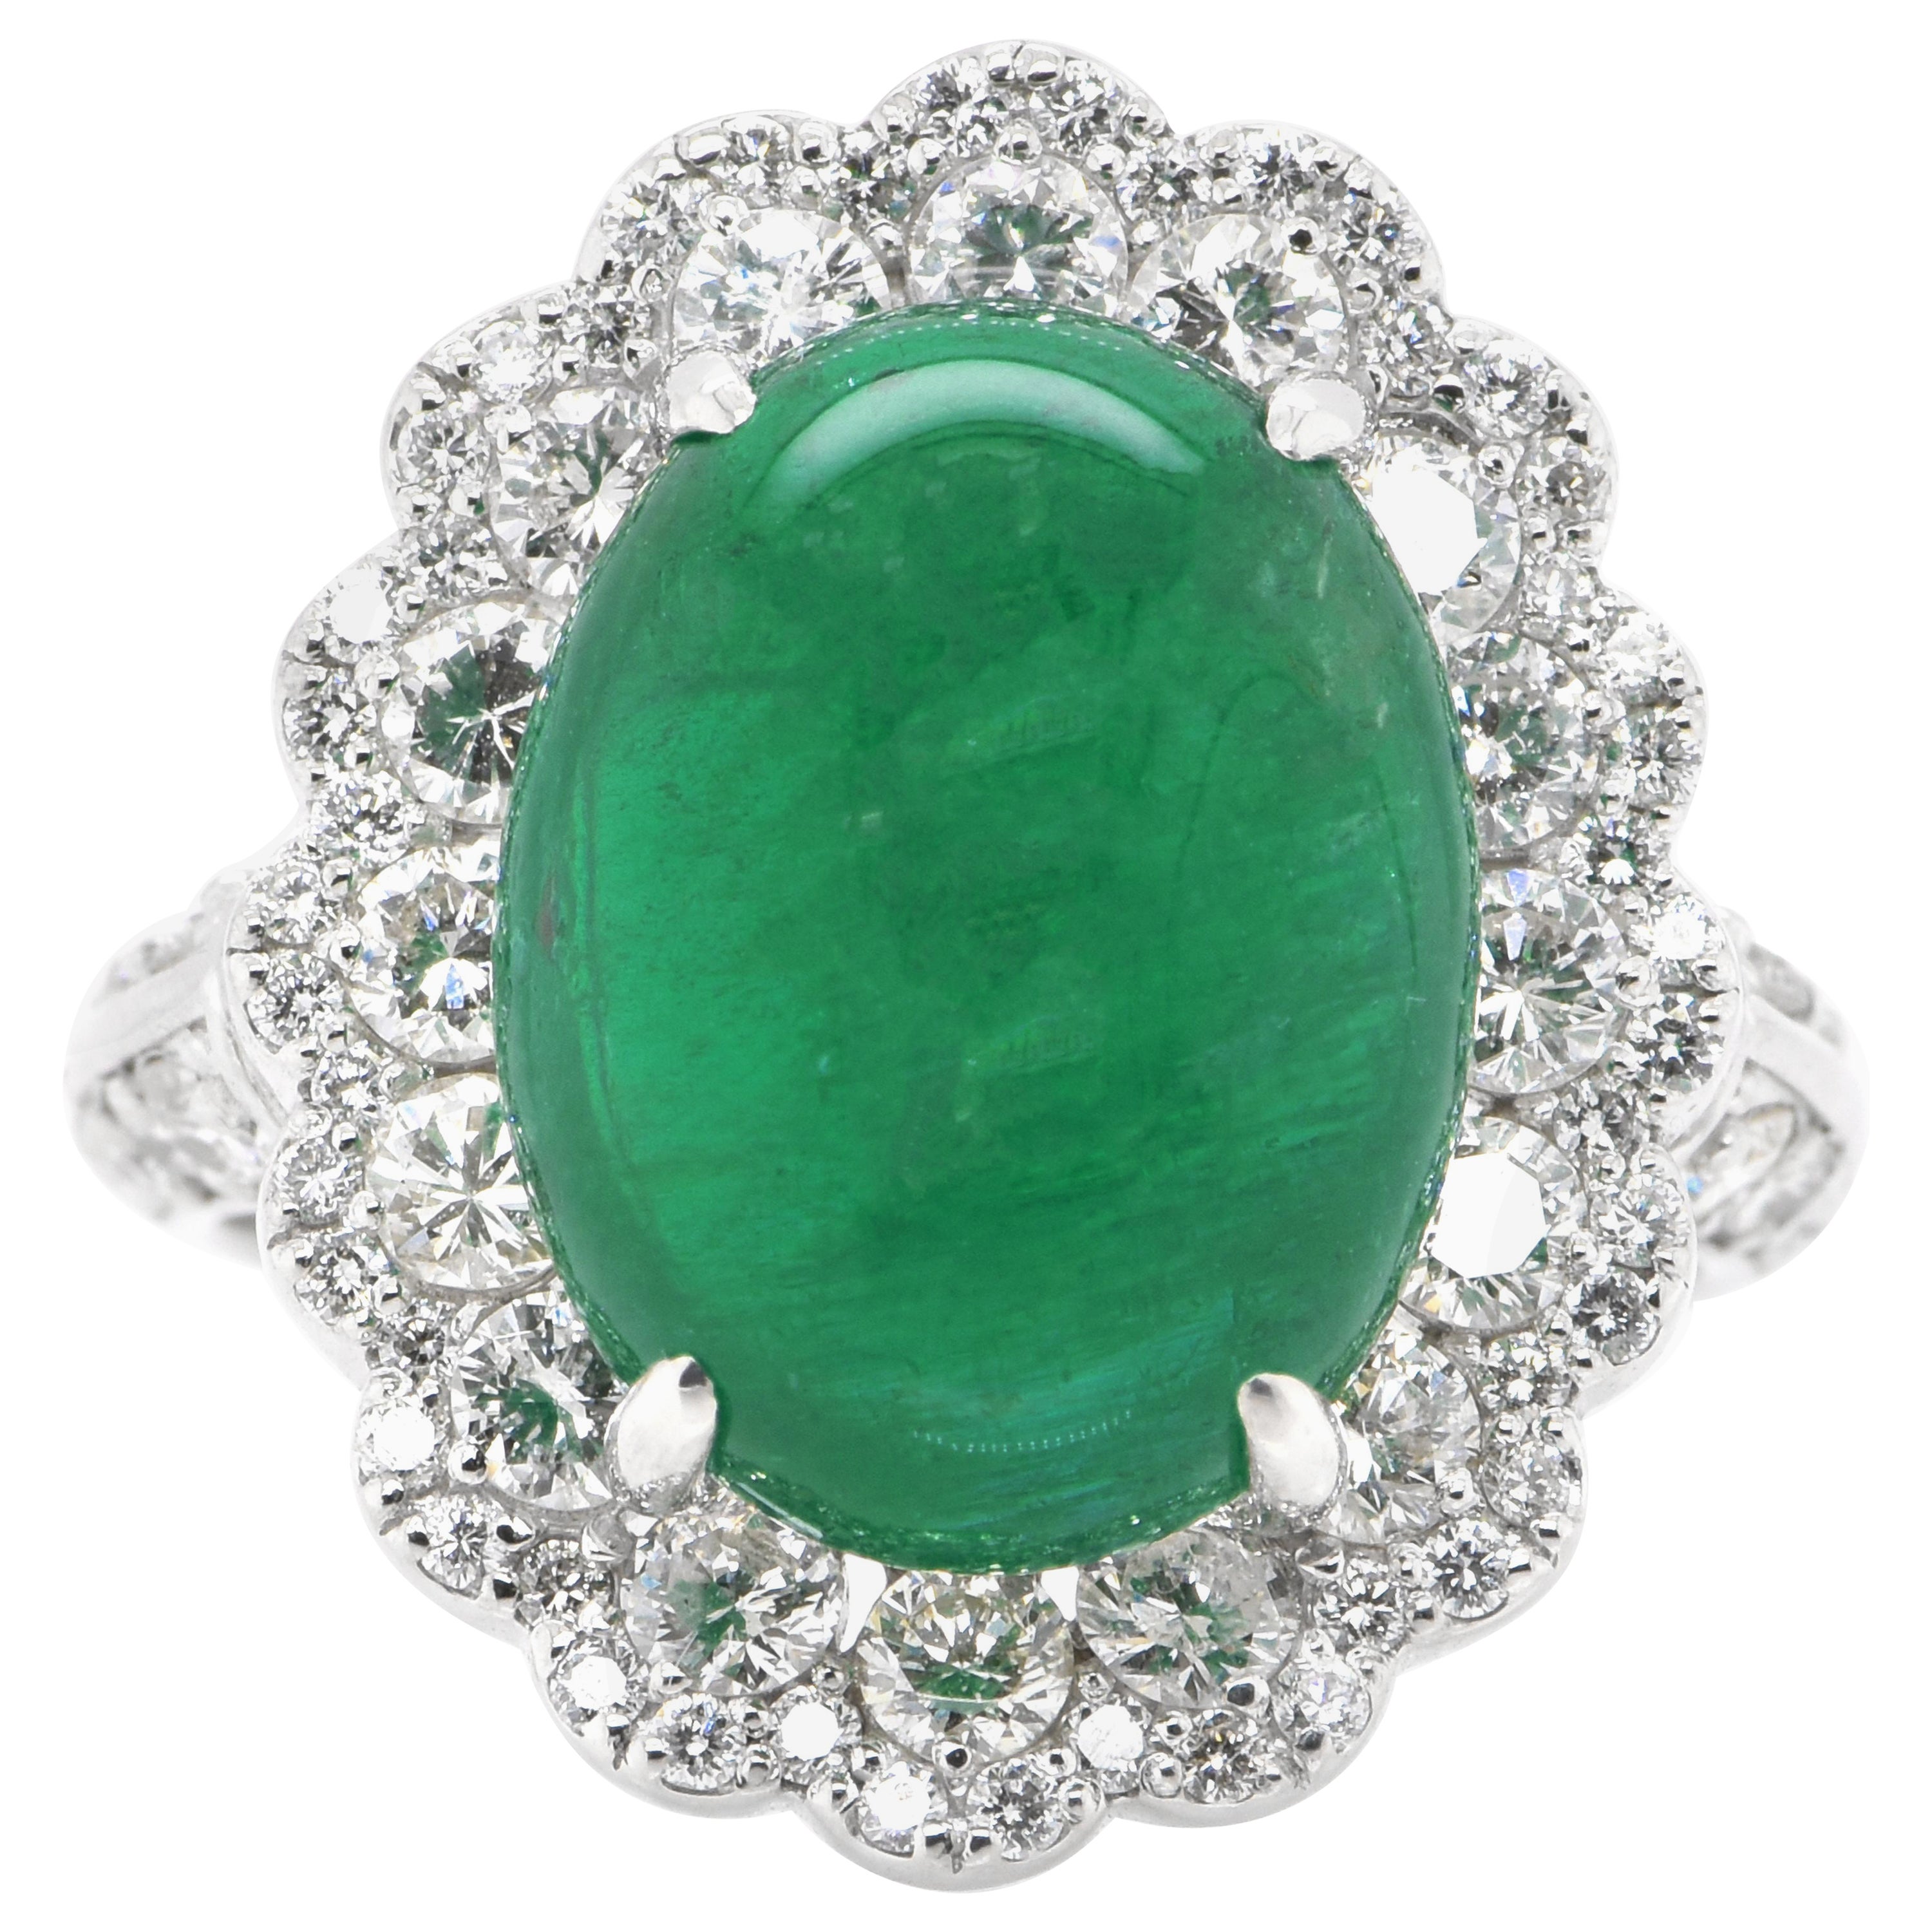 8.18 Carat Natural African Emerald Cabochon and Diamond Ring Set in Platinum